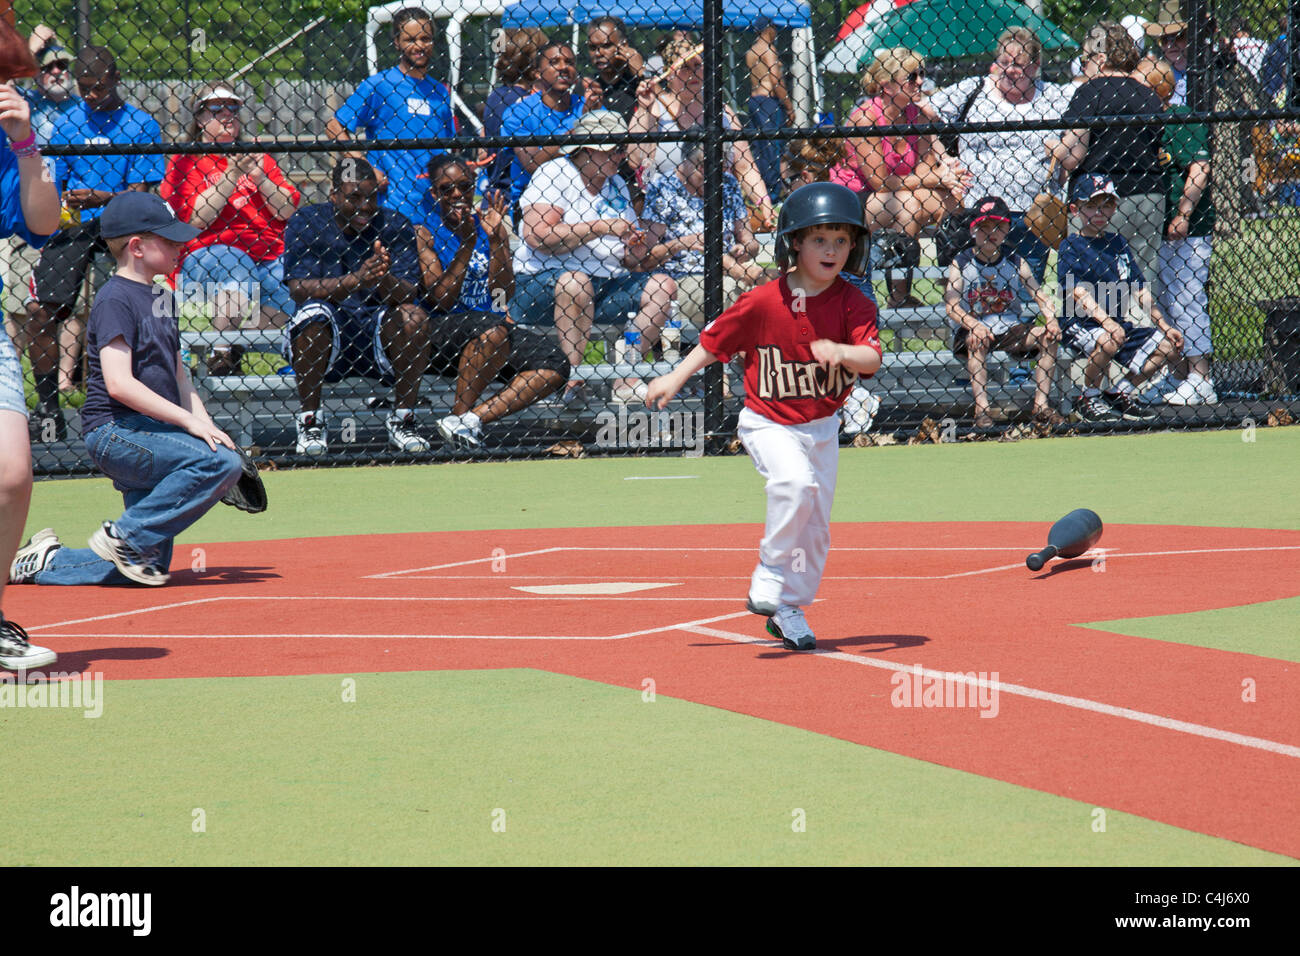 Children with disabilities play baseball in the Miracle League. Stock Photo